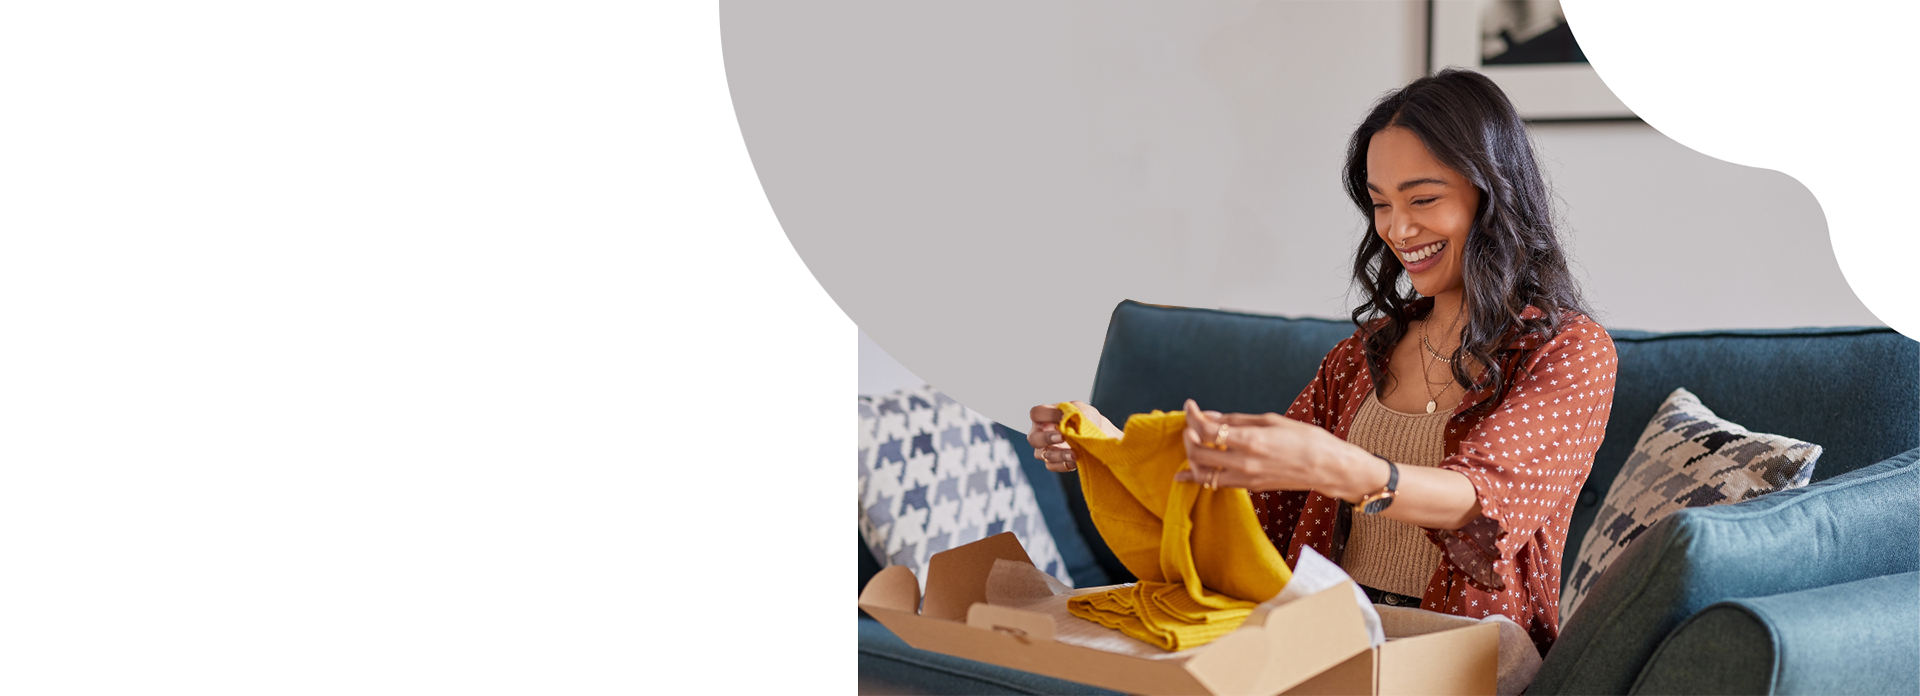 woman sitting on couch opening package and holding a yellow sweater